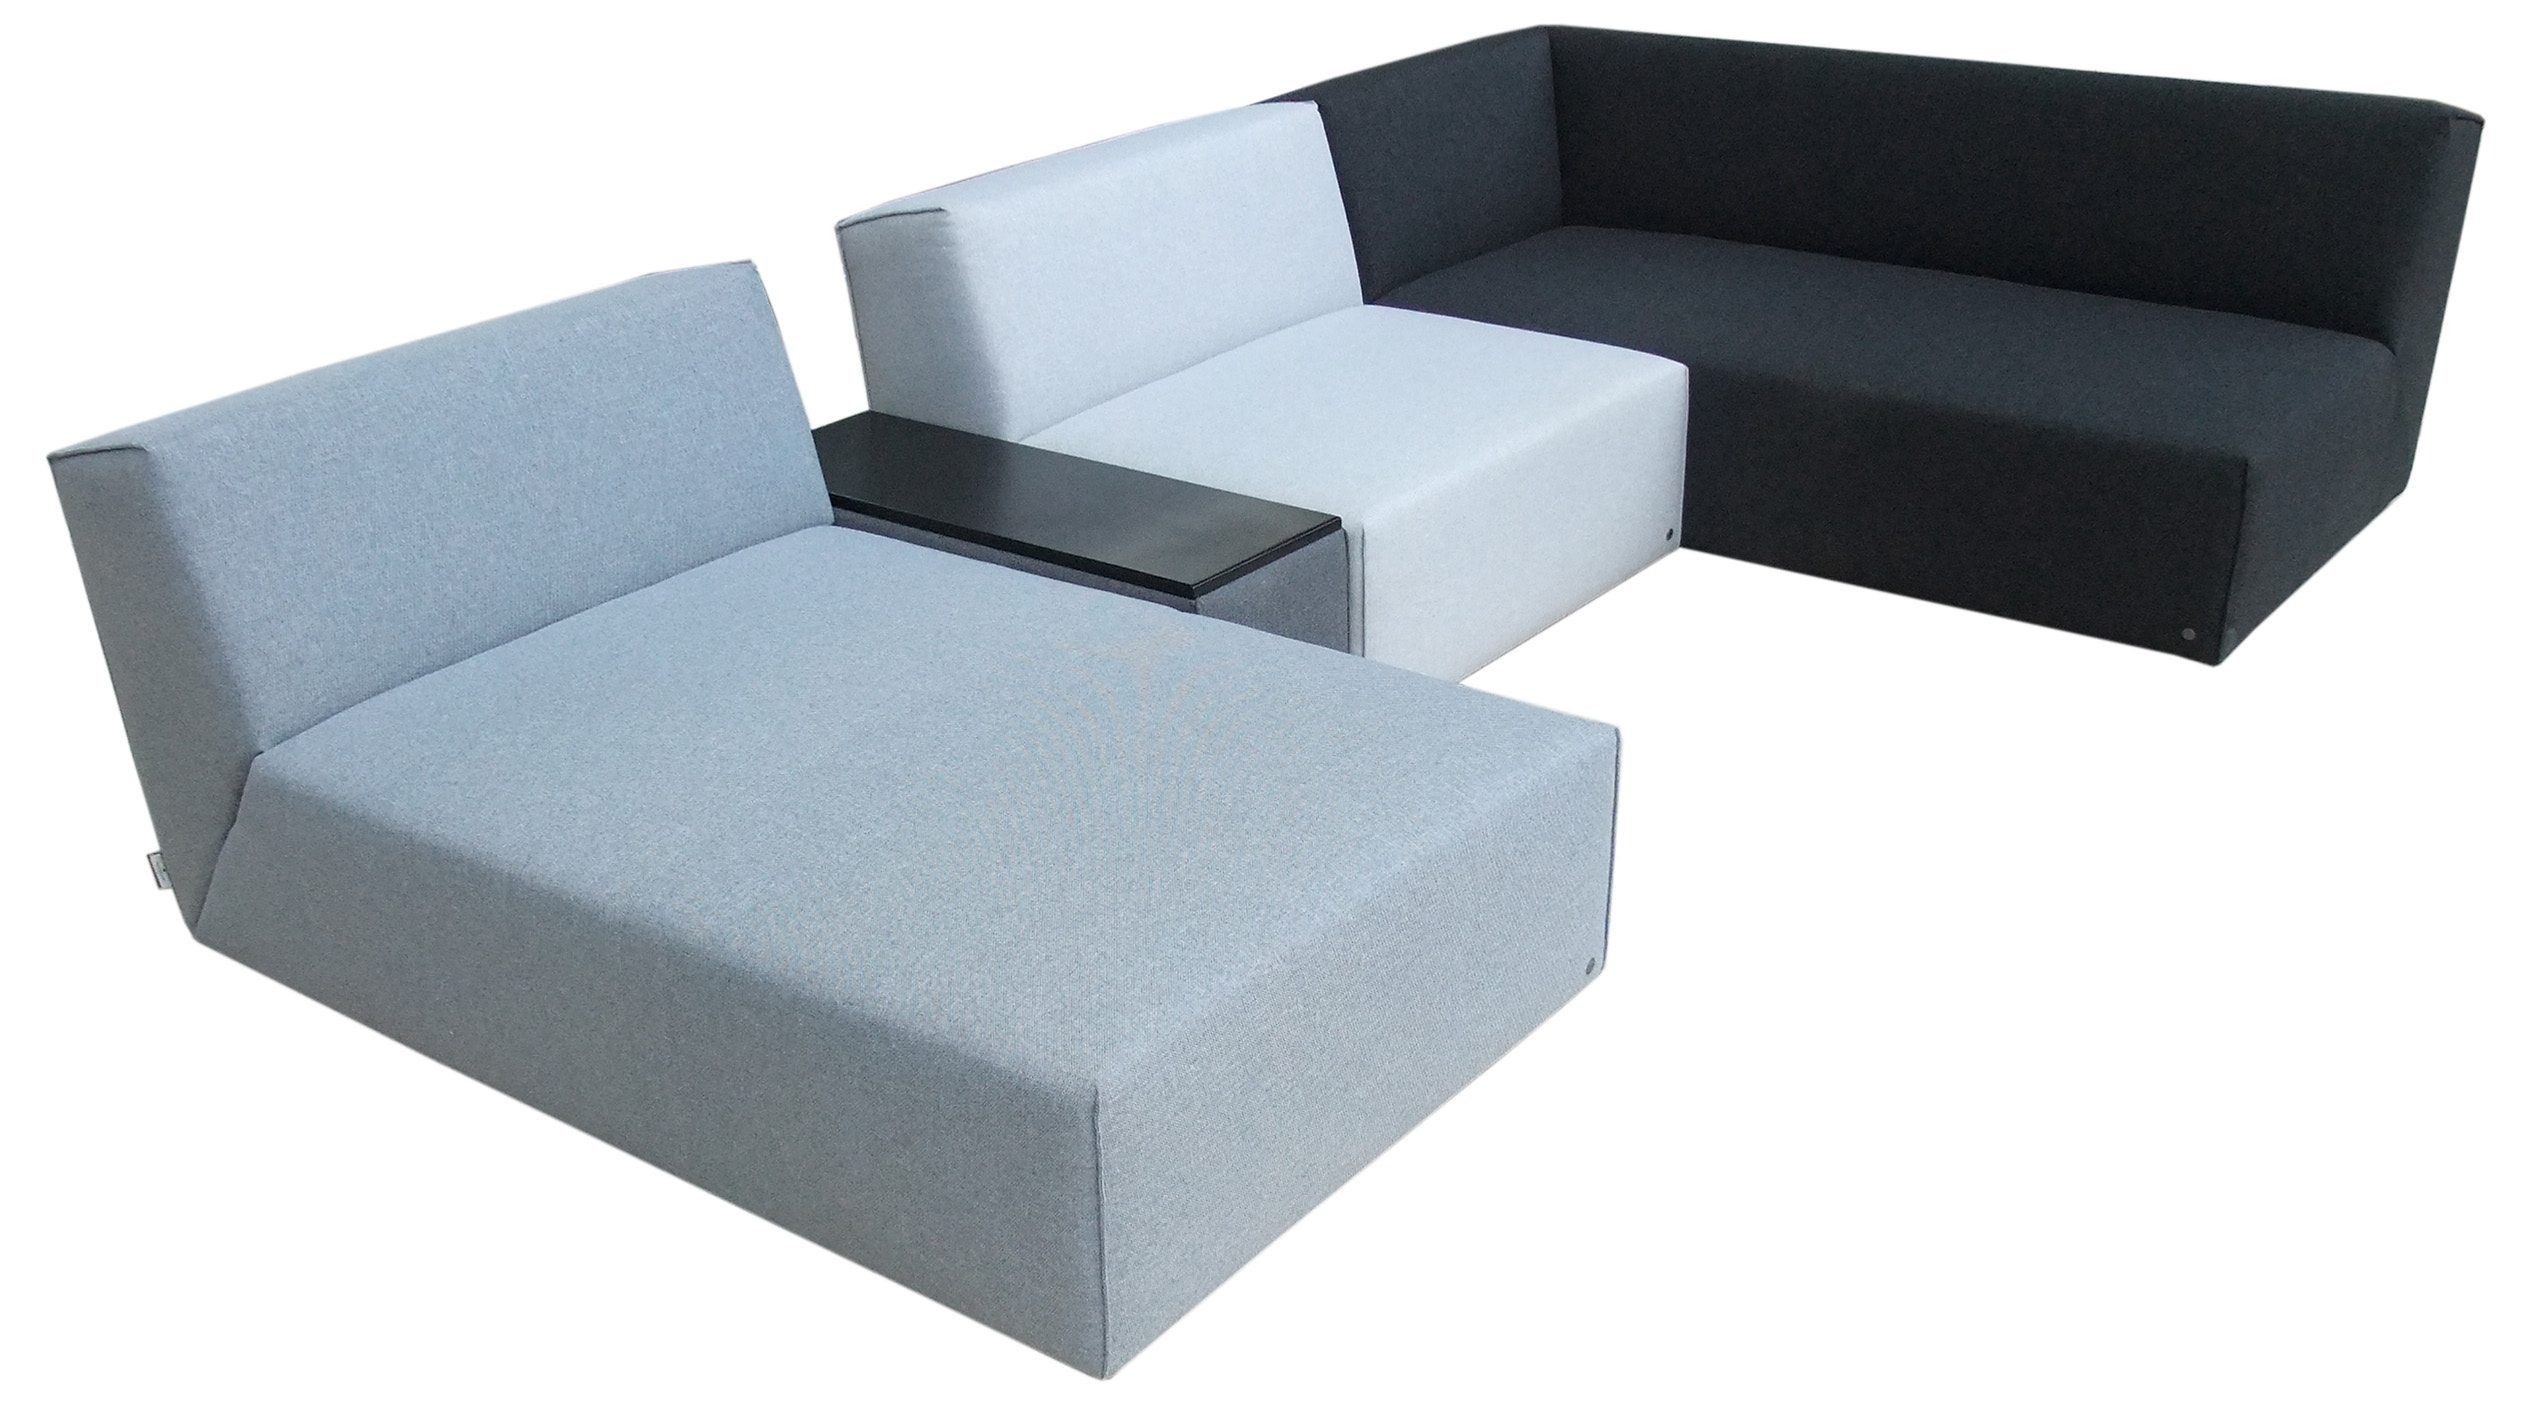 Chaiselongue TOM HOME Bettfunktion ELEMENTS, Sofaelement mit TAILOR wahlweise